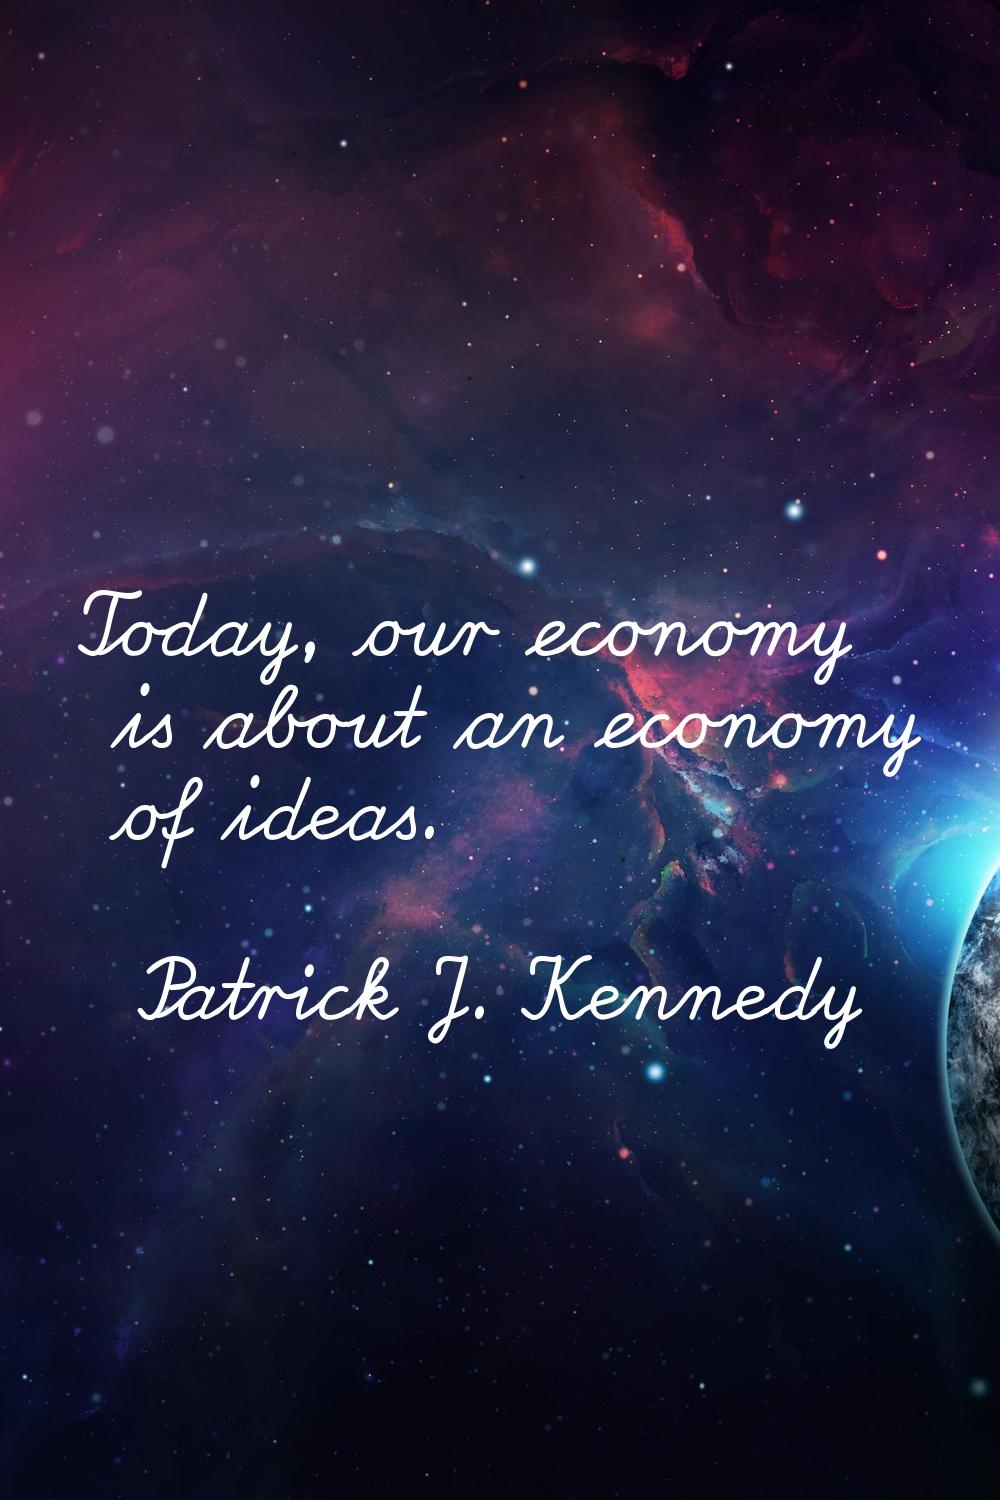 Today, our economy is about an economy of ideas.